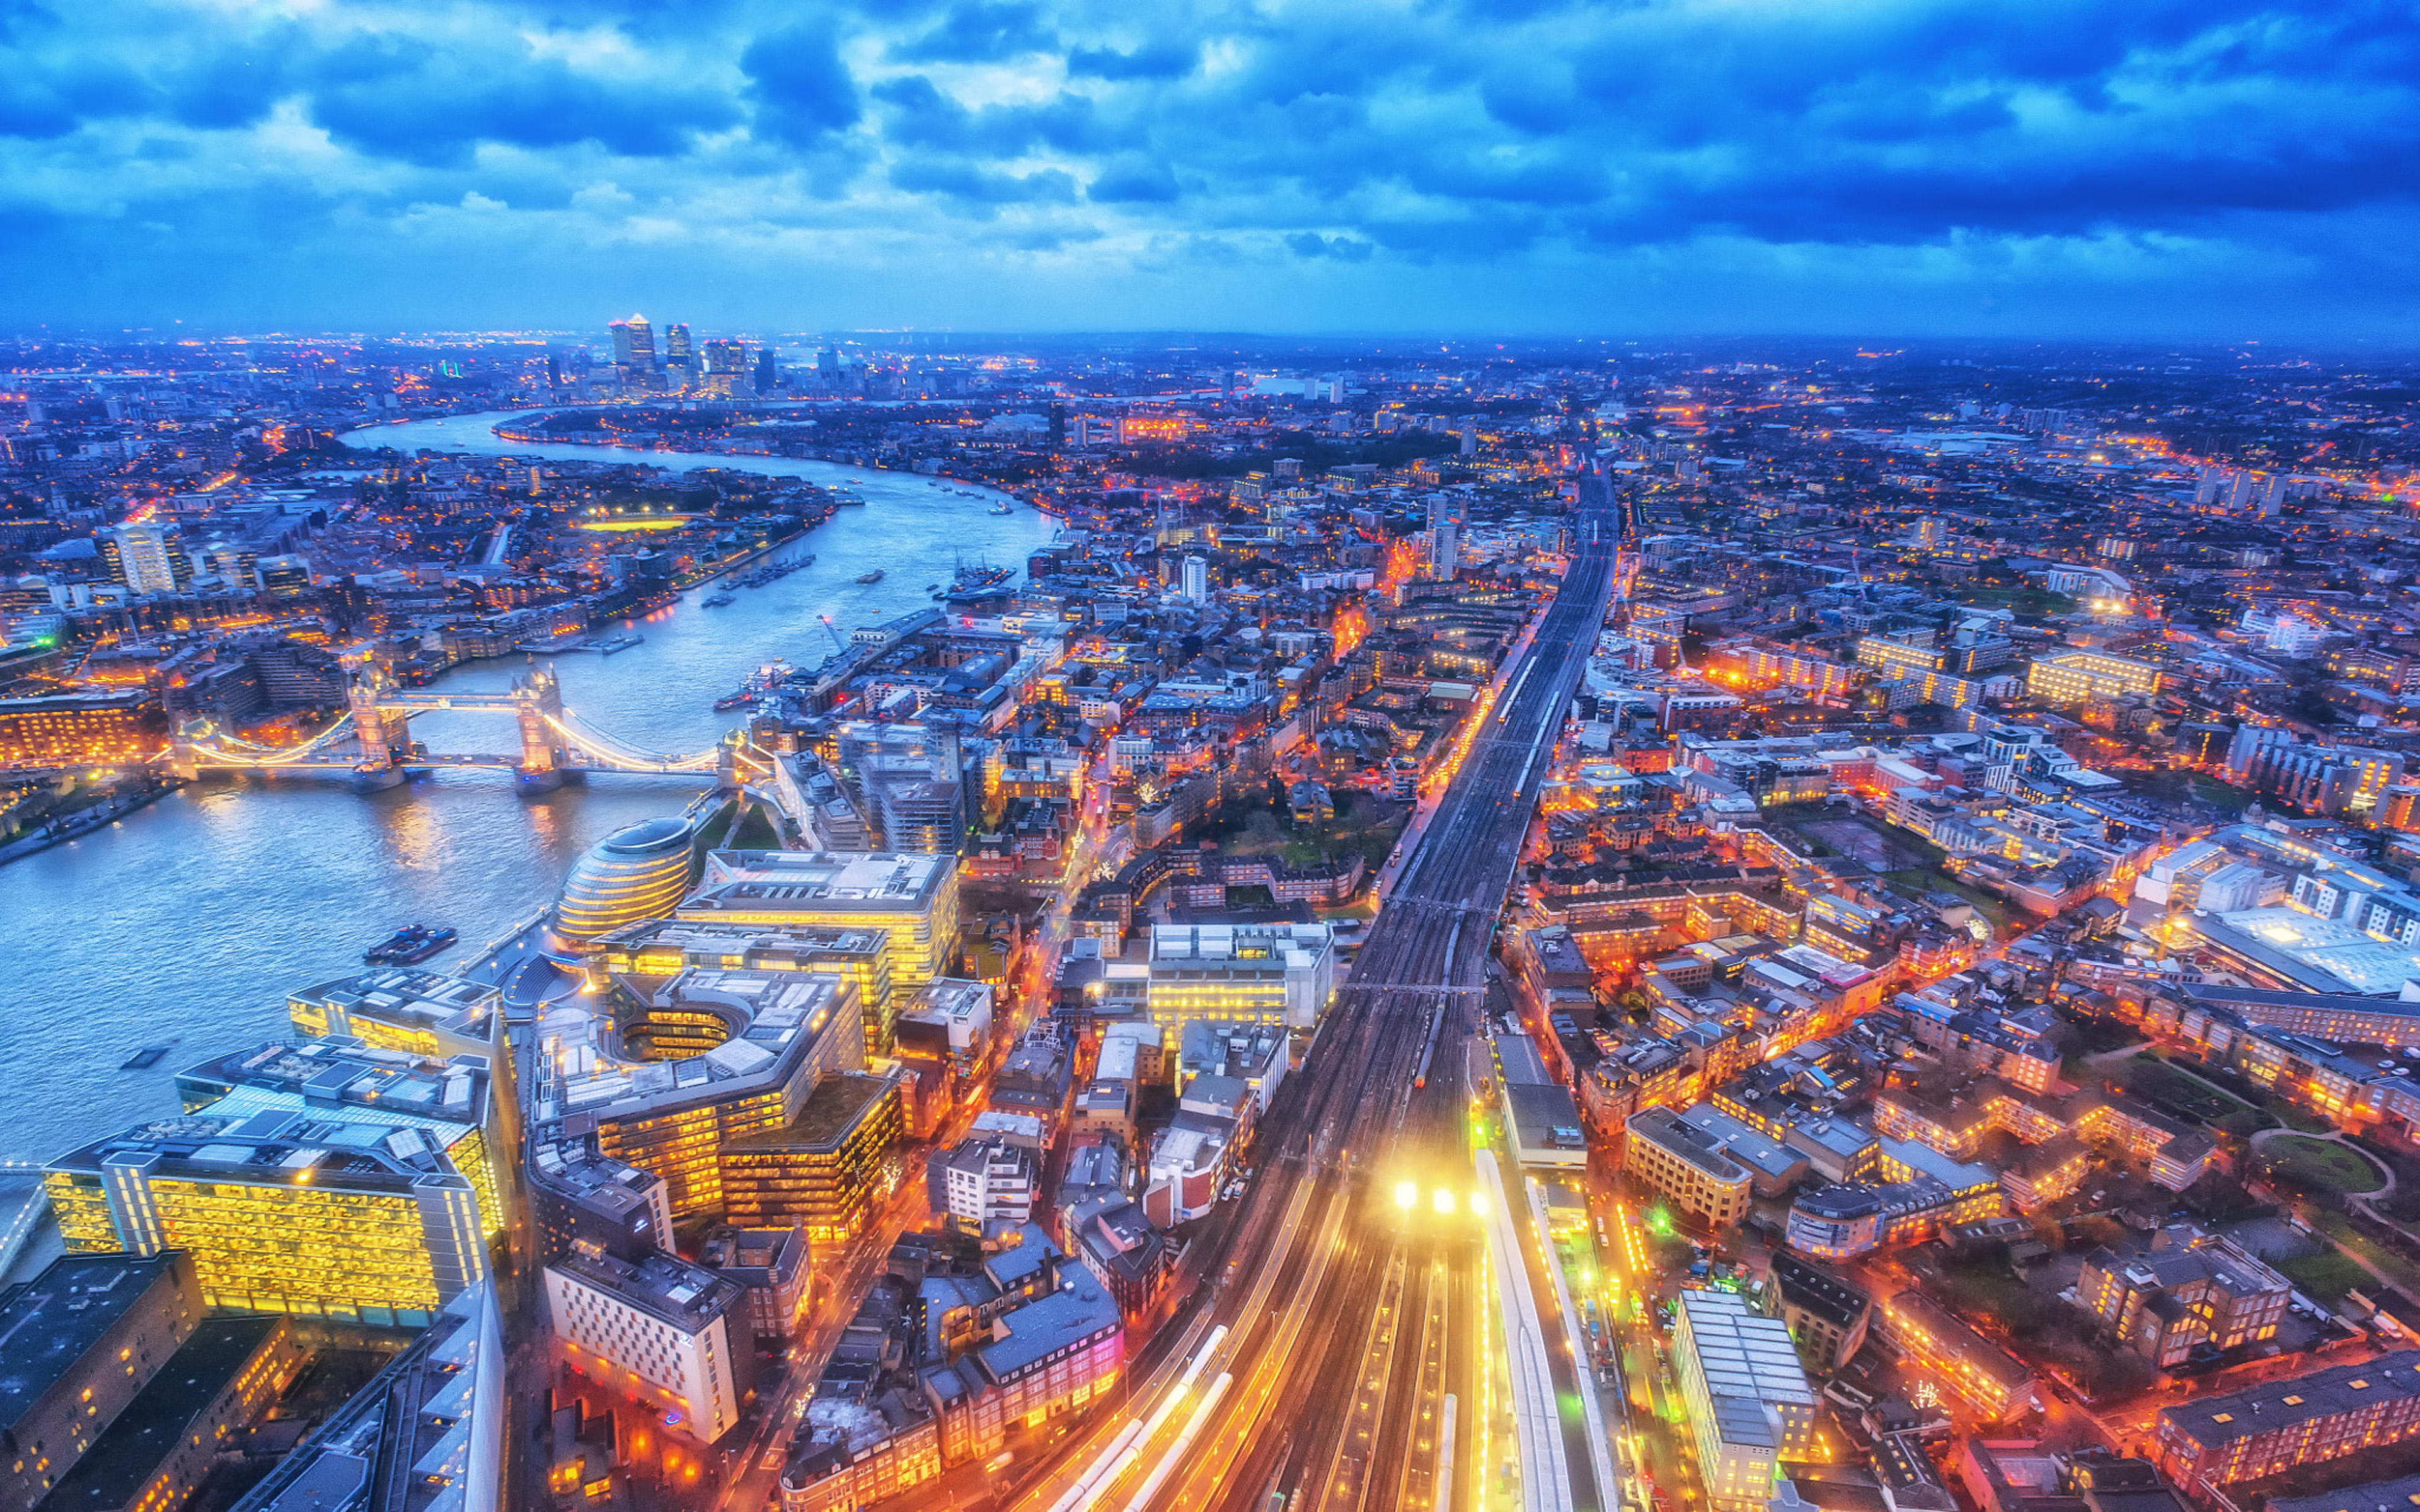 The City Of London And Blue Hour Air View 4k Ultra Hd Wallpaper For Desktop  Laptop Tablet Mobile Phones And Tv 3840x2400 : 